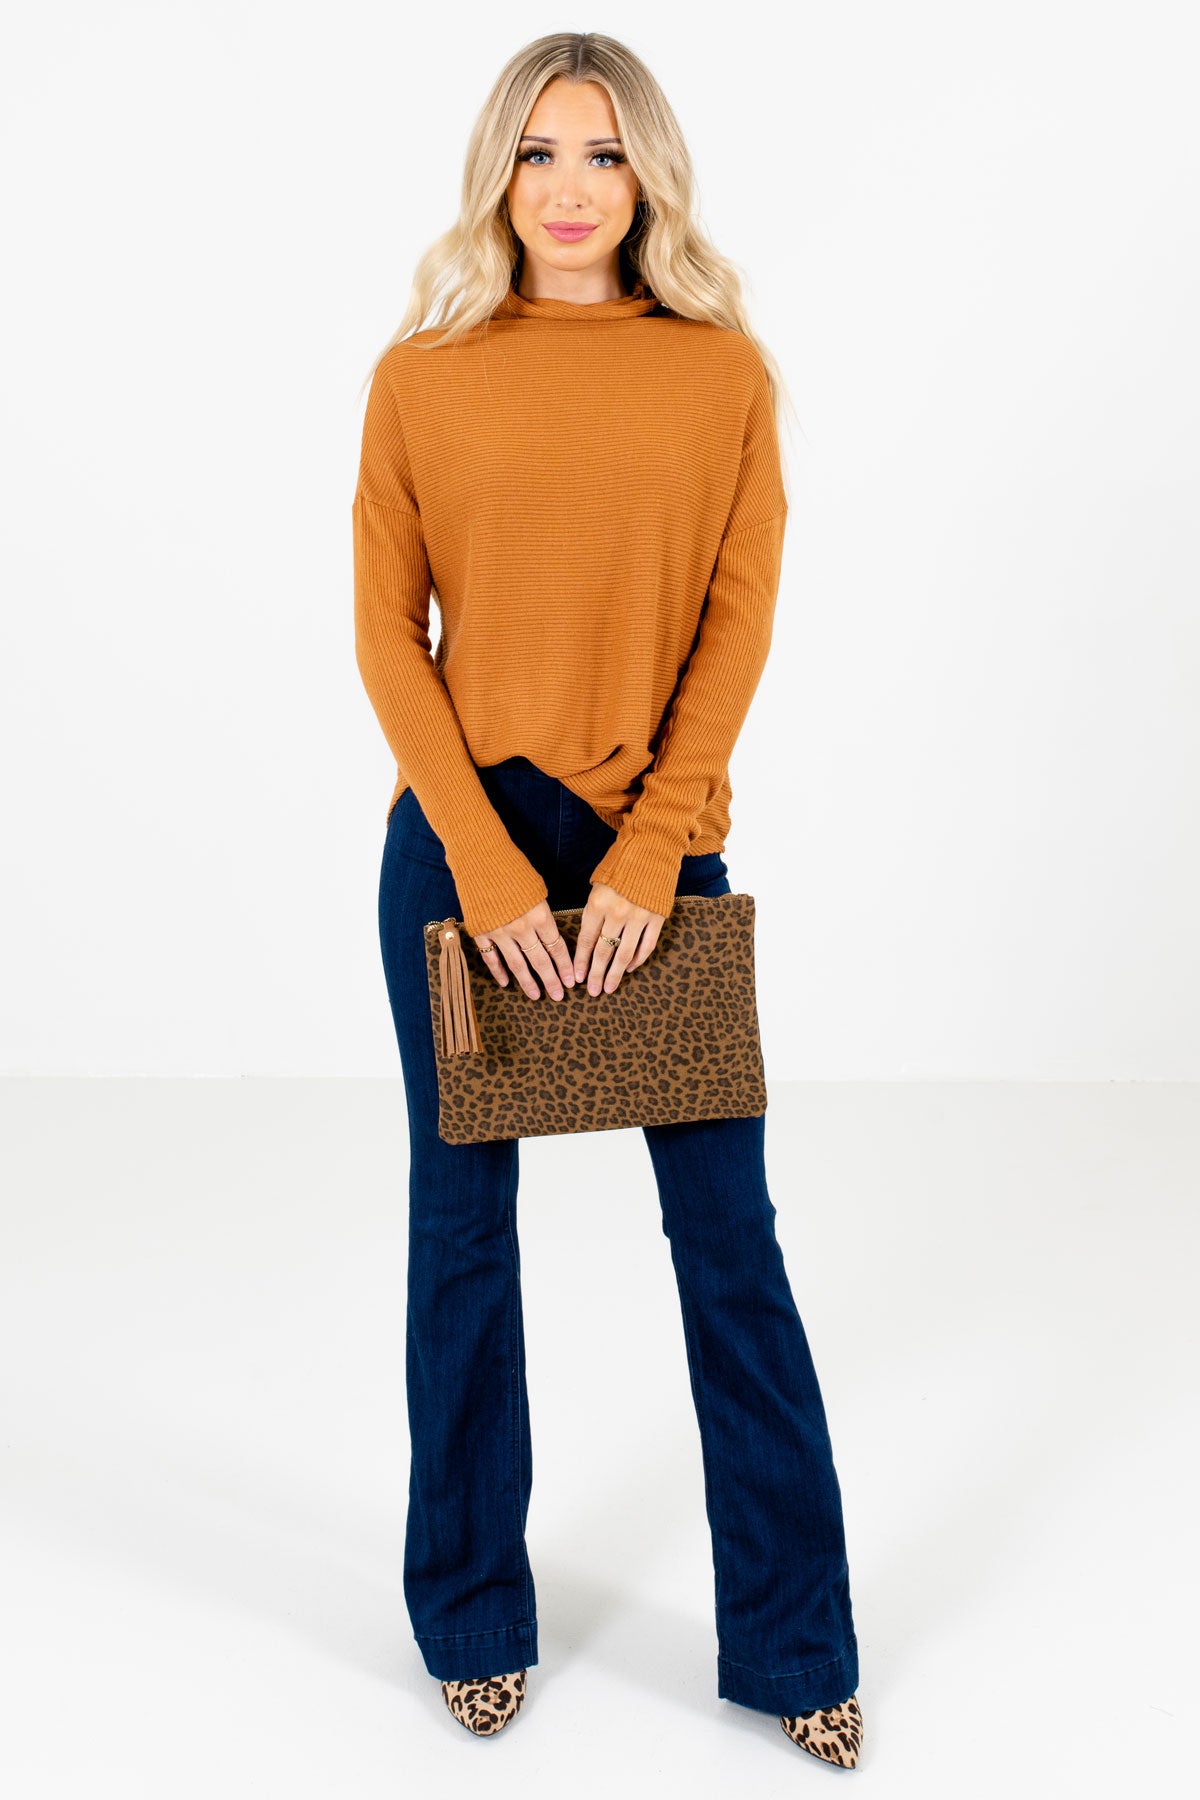 Women’s Tawny Orange Fall and Winter Boutique Clothing